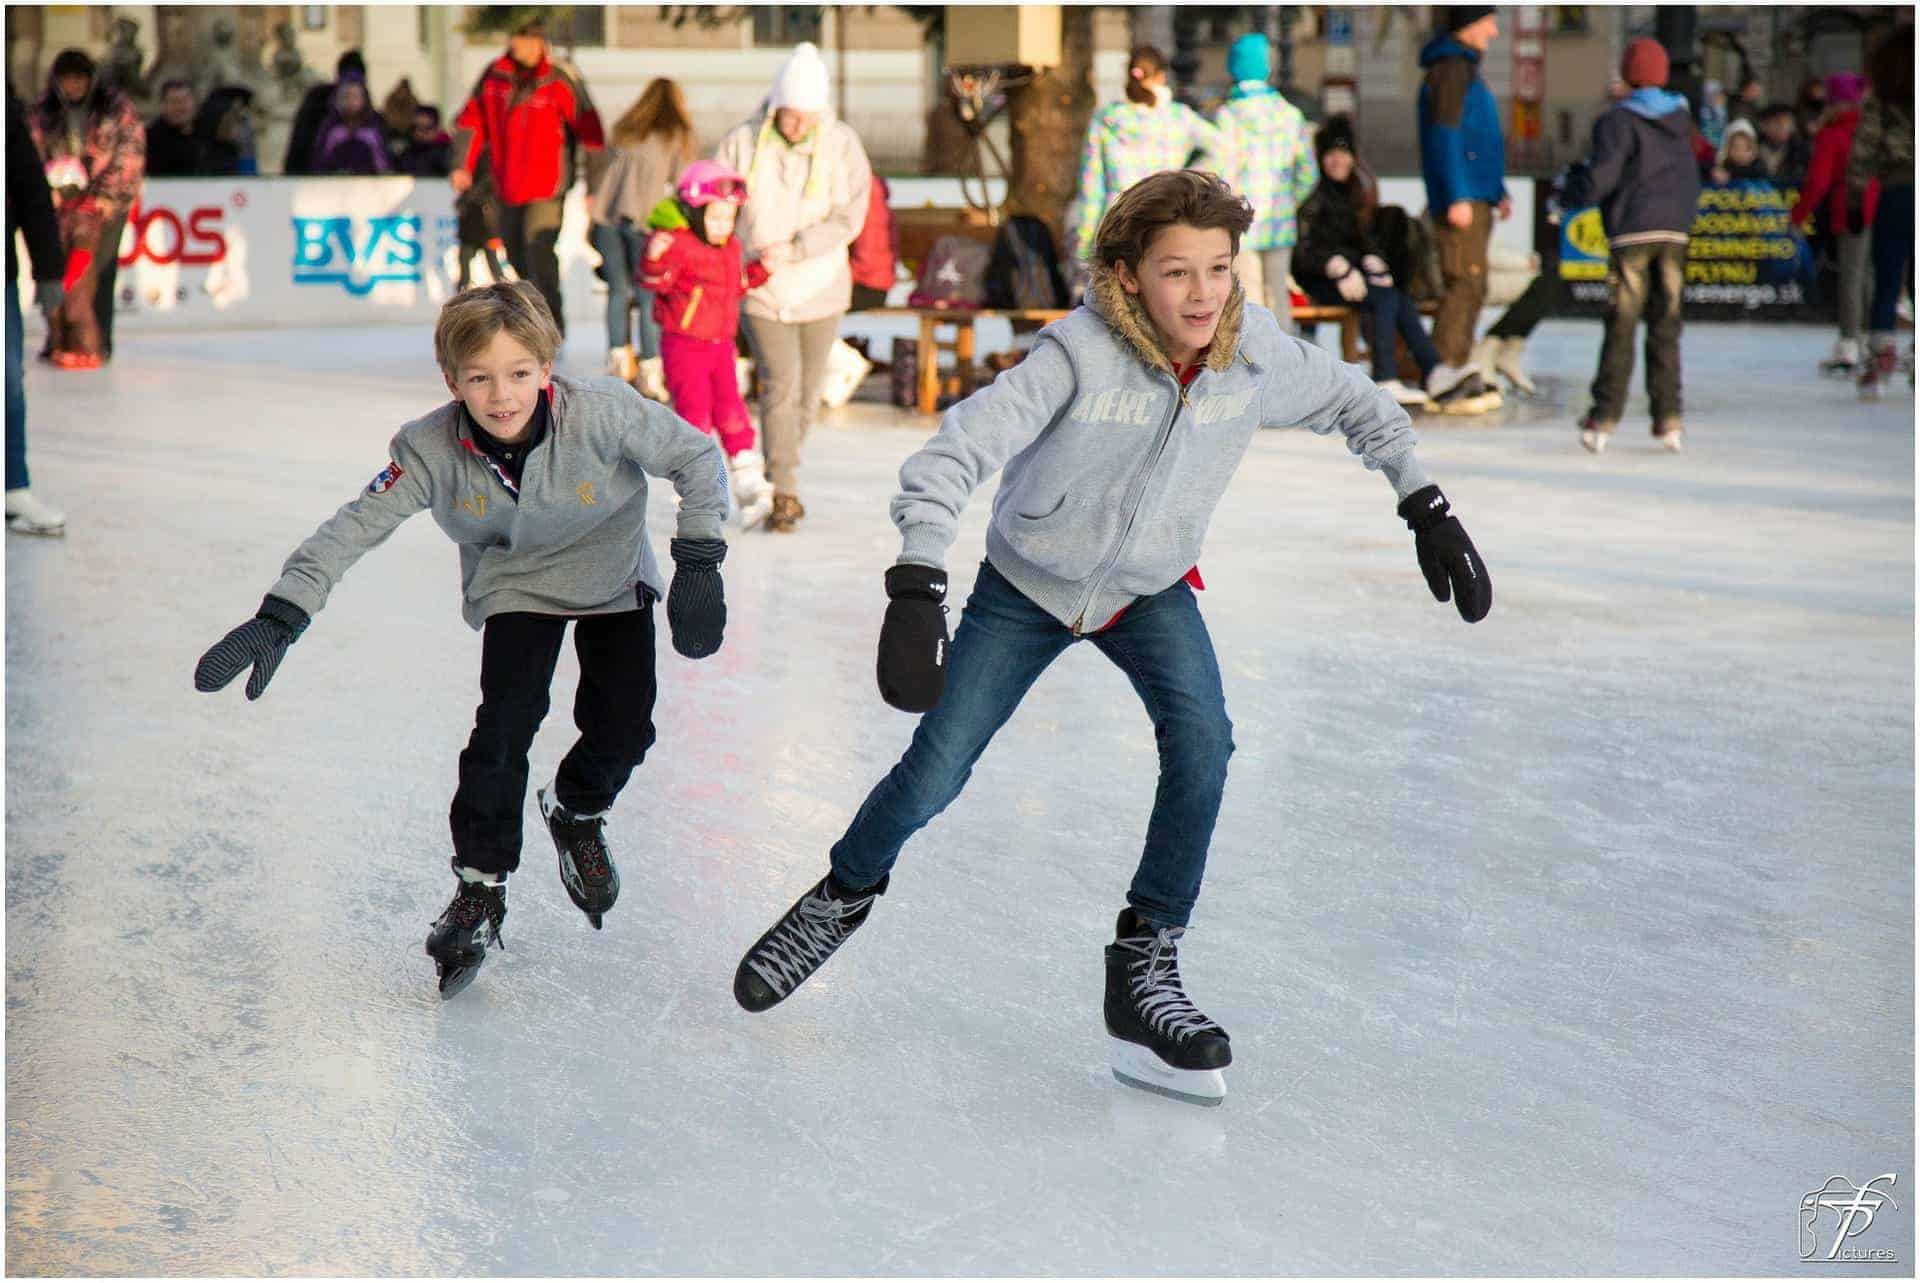 5 Reasons Why Ice Skating Is the Best Winter Workout